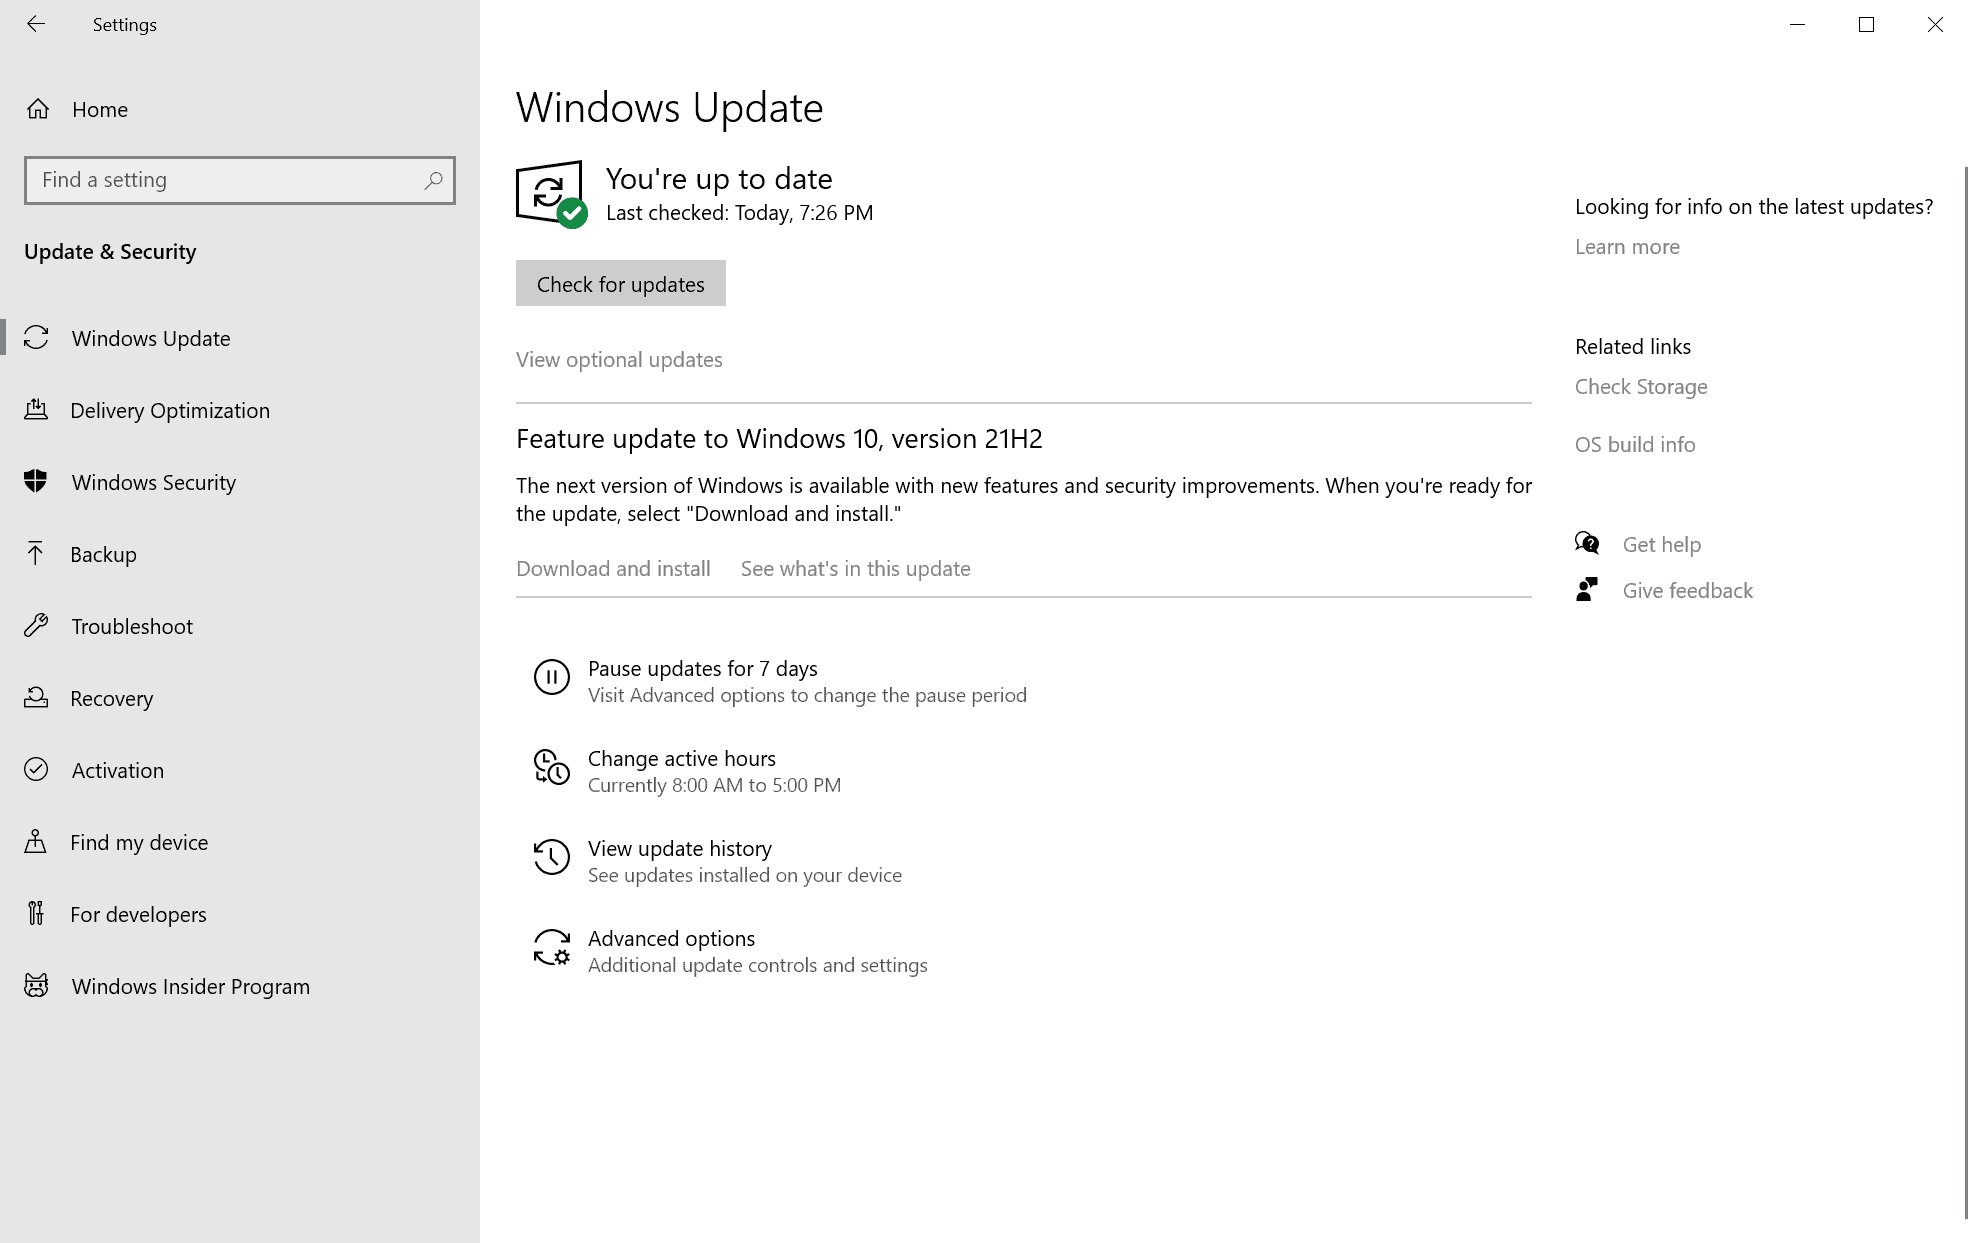 The Windows 10 November 2021 Update is now available (Windows 10 version 21H2) windows-10-version-21h2-released.png